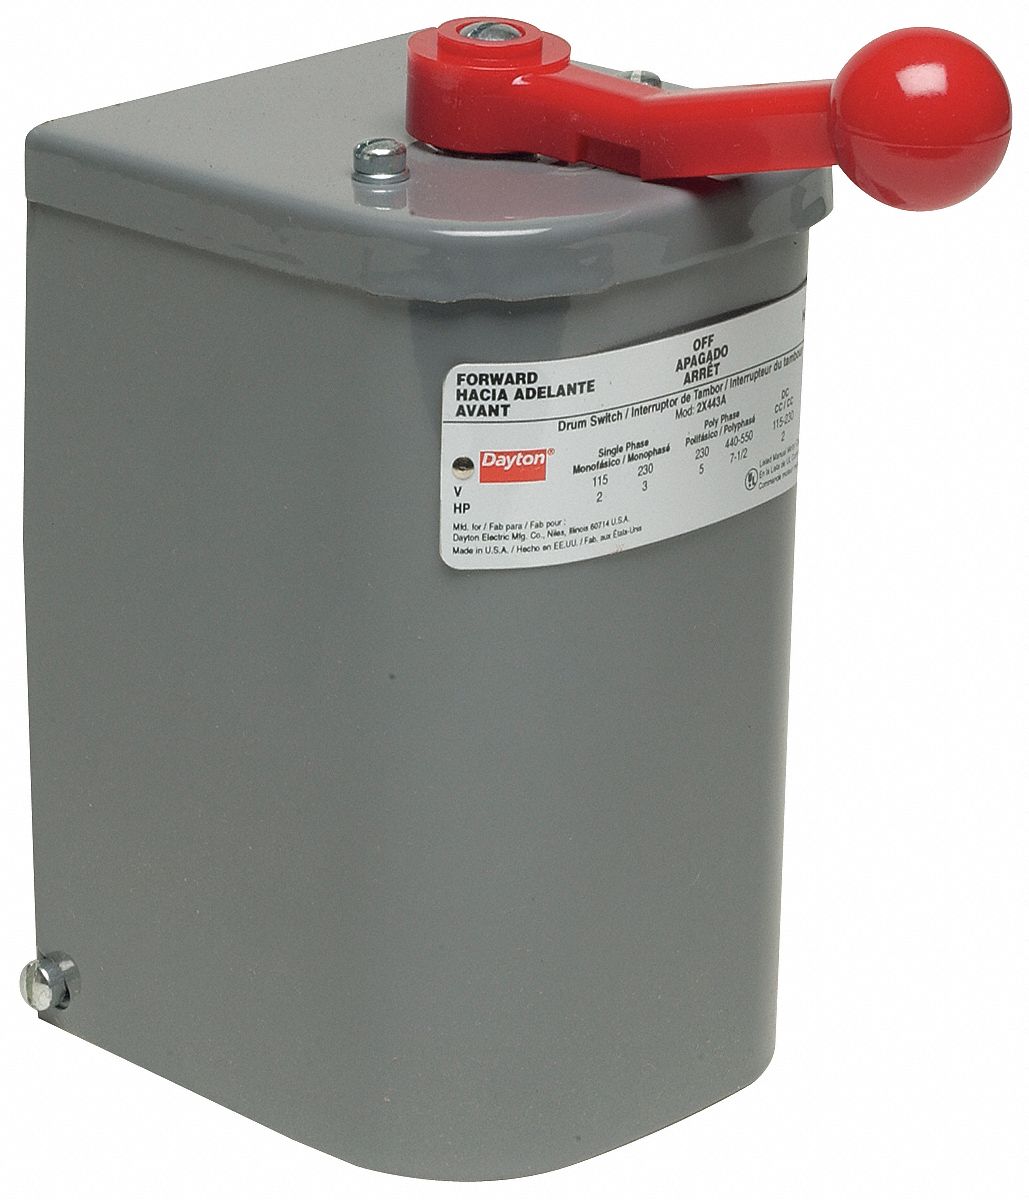 Dayton 2X443 Maintained Reversing Plastic Drum Switch 3 Pole NEMA Rating 1 for sale online